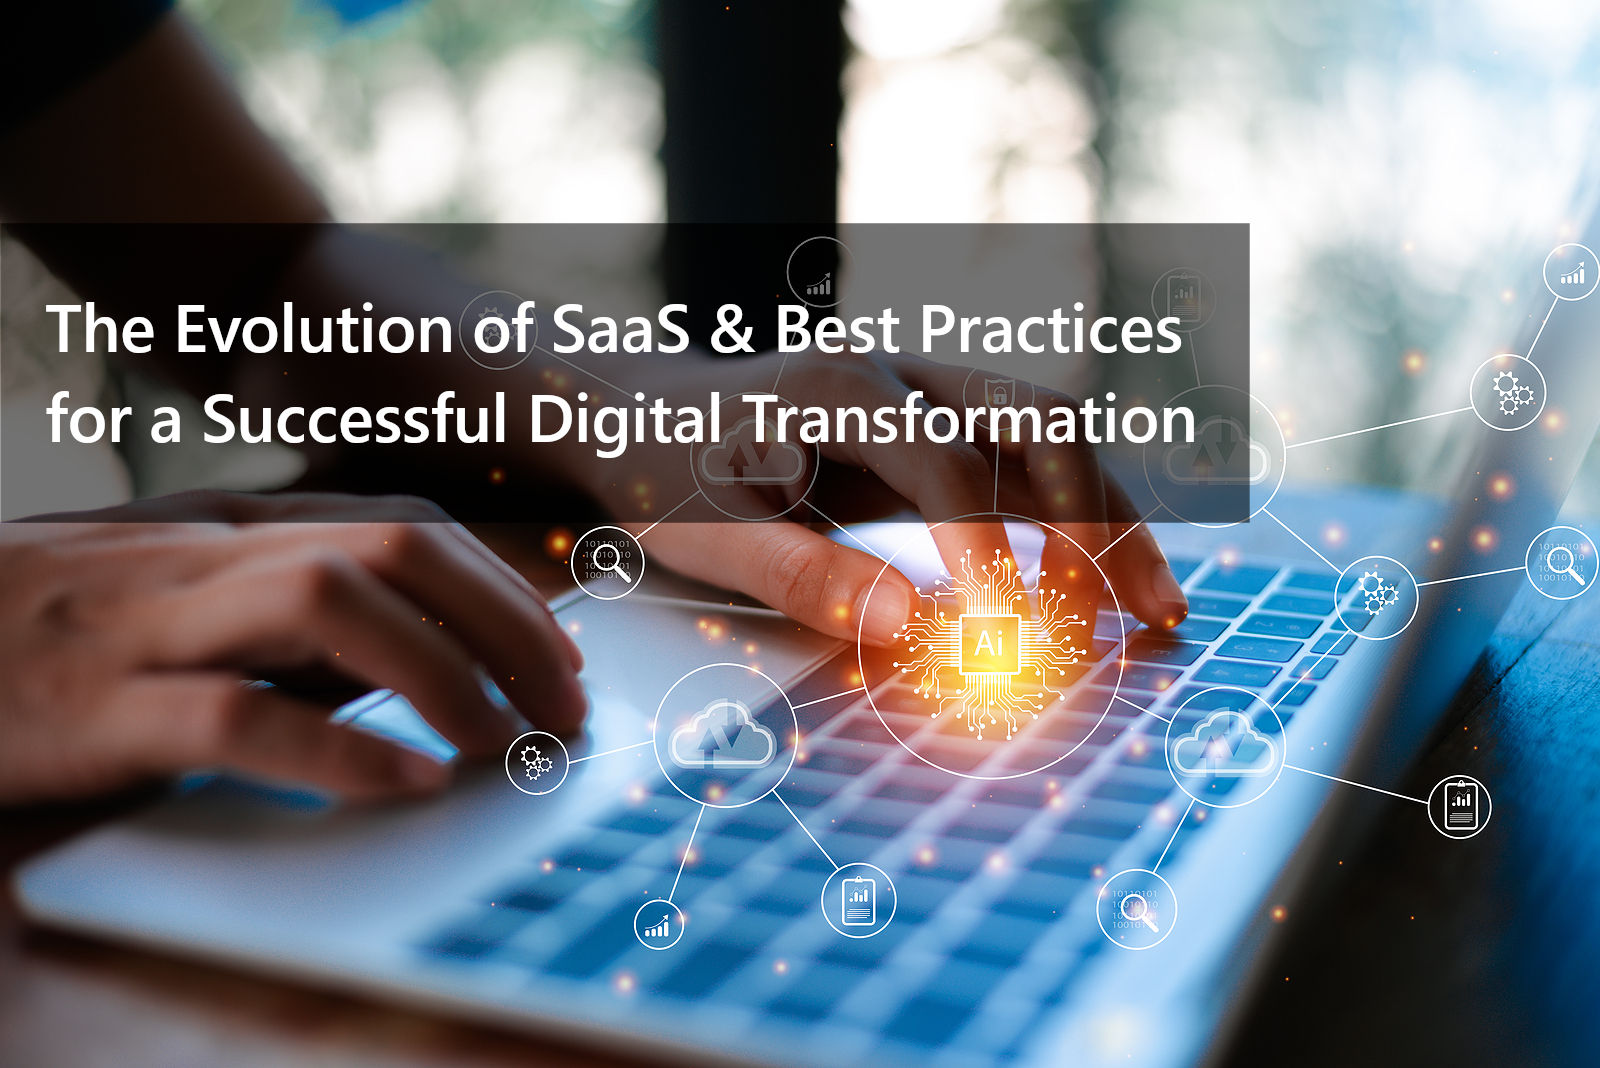 2022-01-w3-The_Evolution_of_SaaS_Best_Practices_for_a_Successful_Digital_Transformation